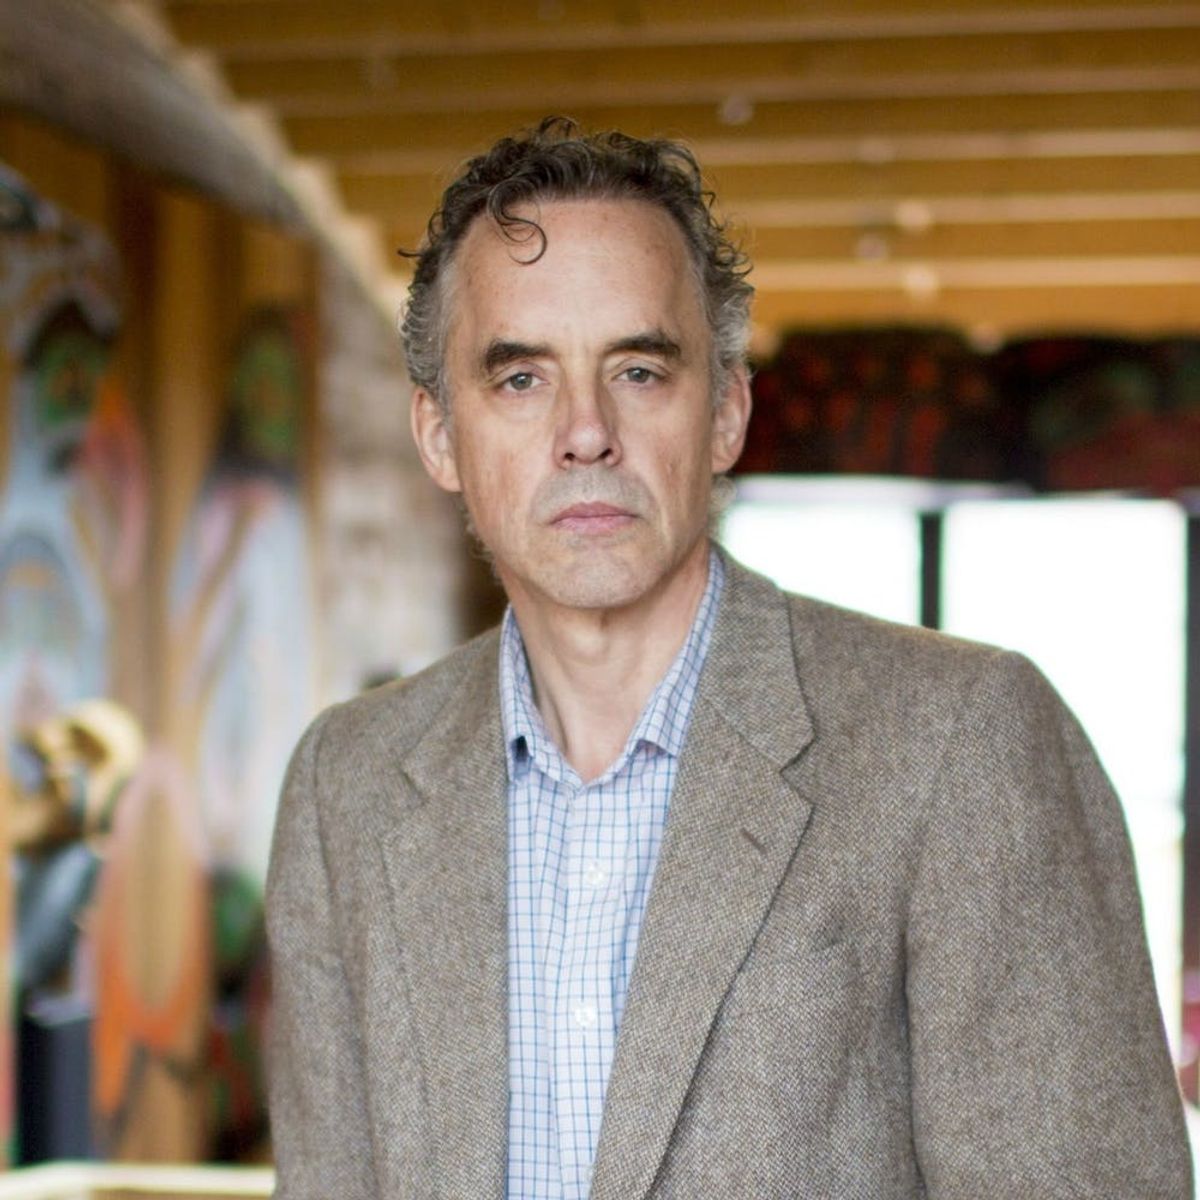 New Zealand’s National Bookstore Is Banning Author Jordan Peterson’s ’12 Rules’ Bestseller